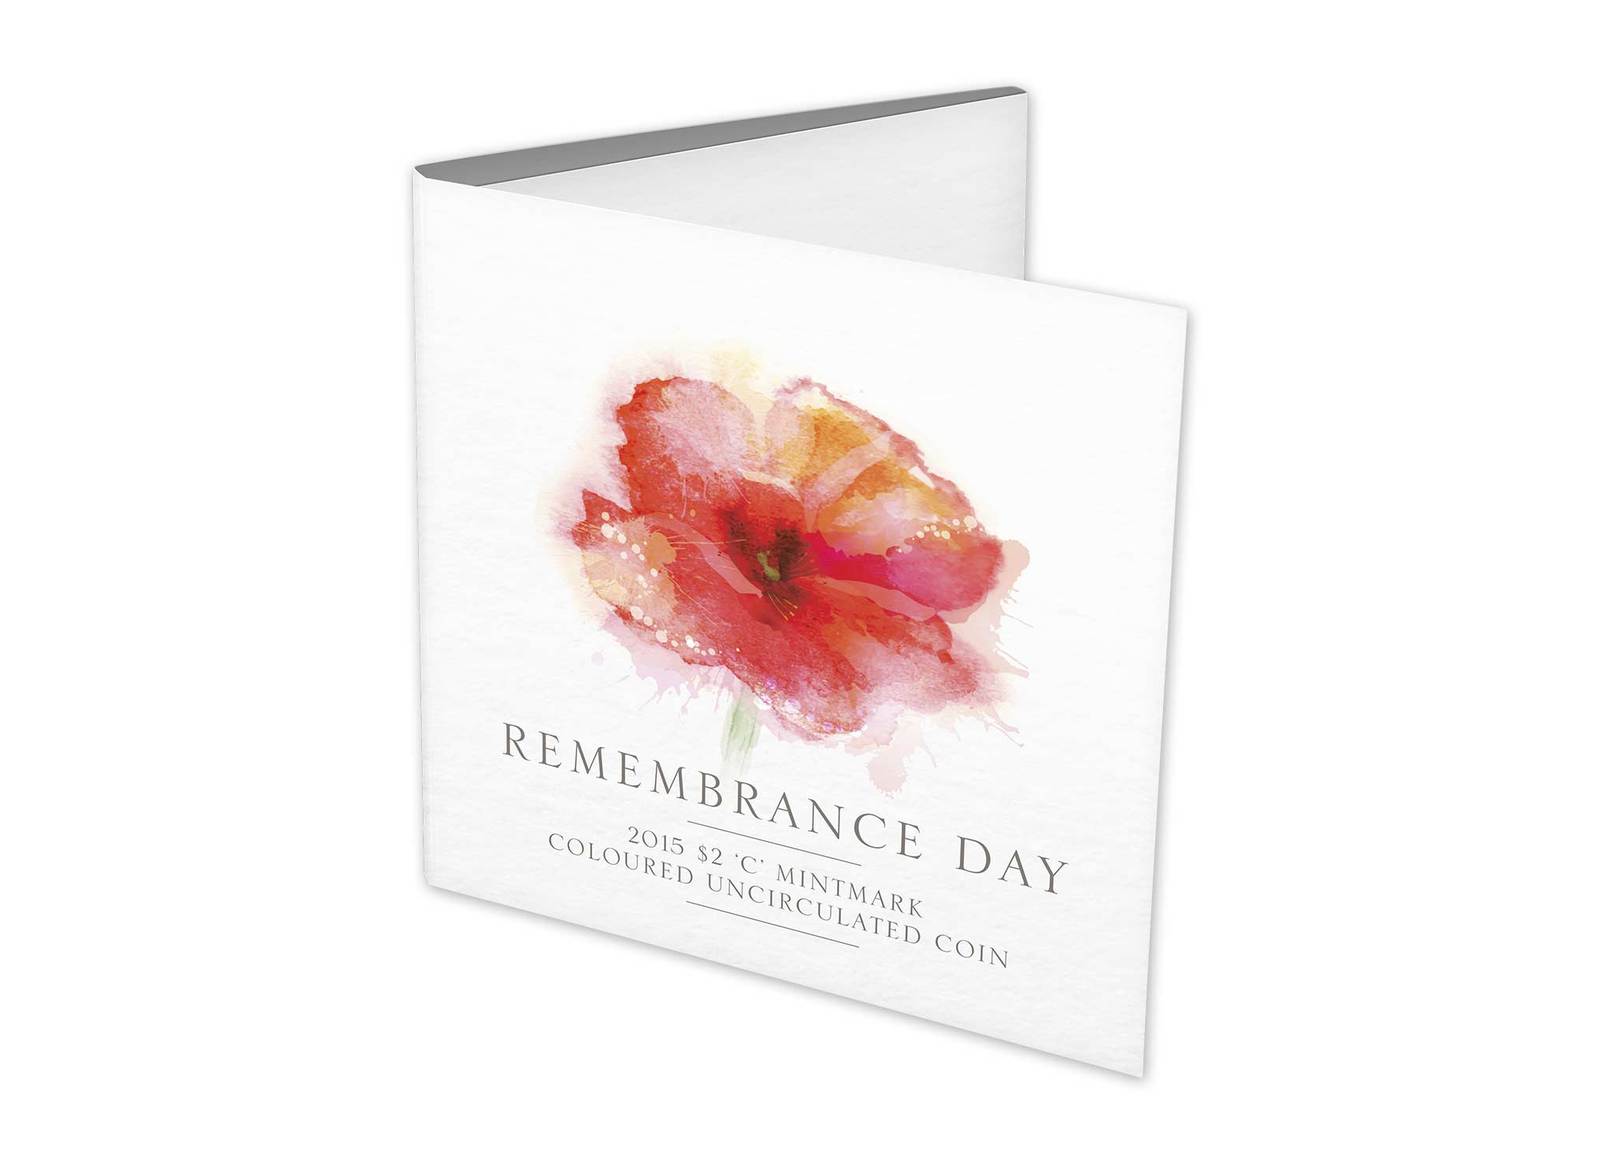 Coins Australia - 2015 $2 ‘C’ Mintmark Coloured Uncirculated Coin Remembrance Day1600 x 1165